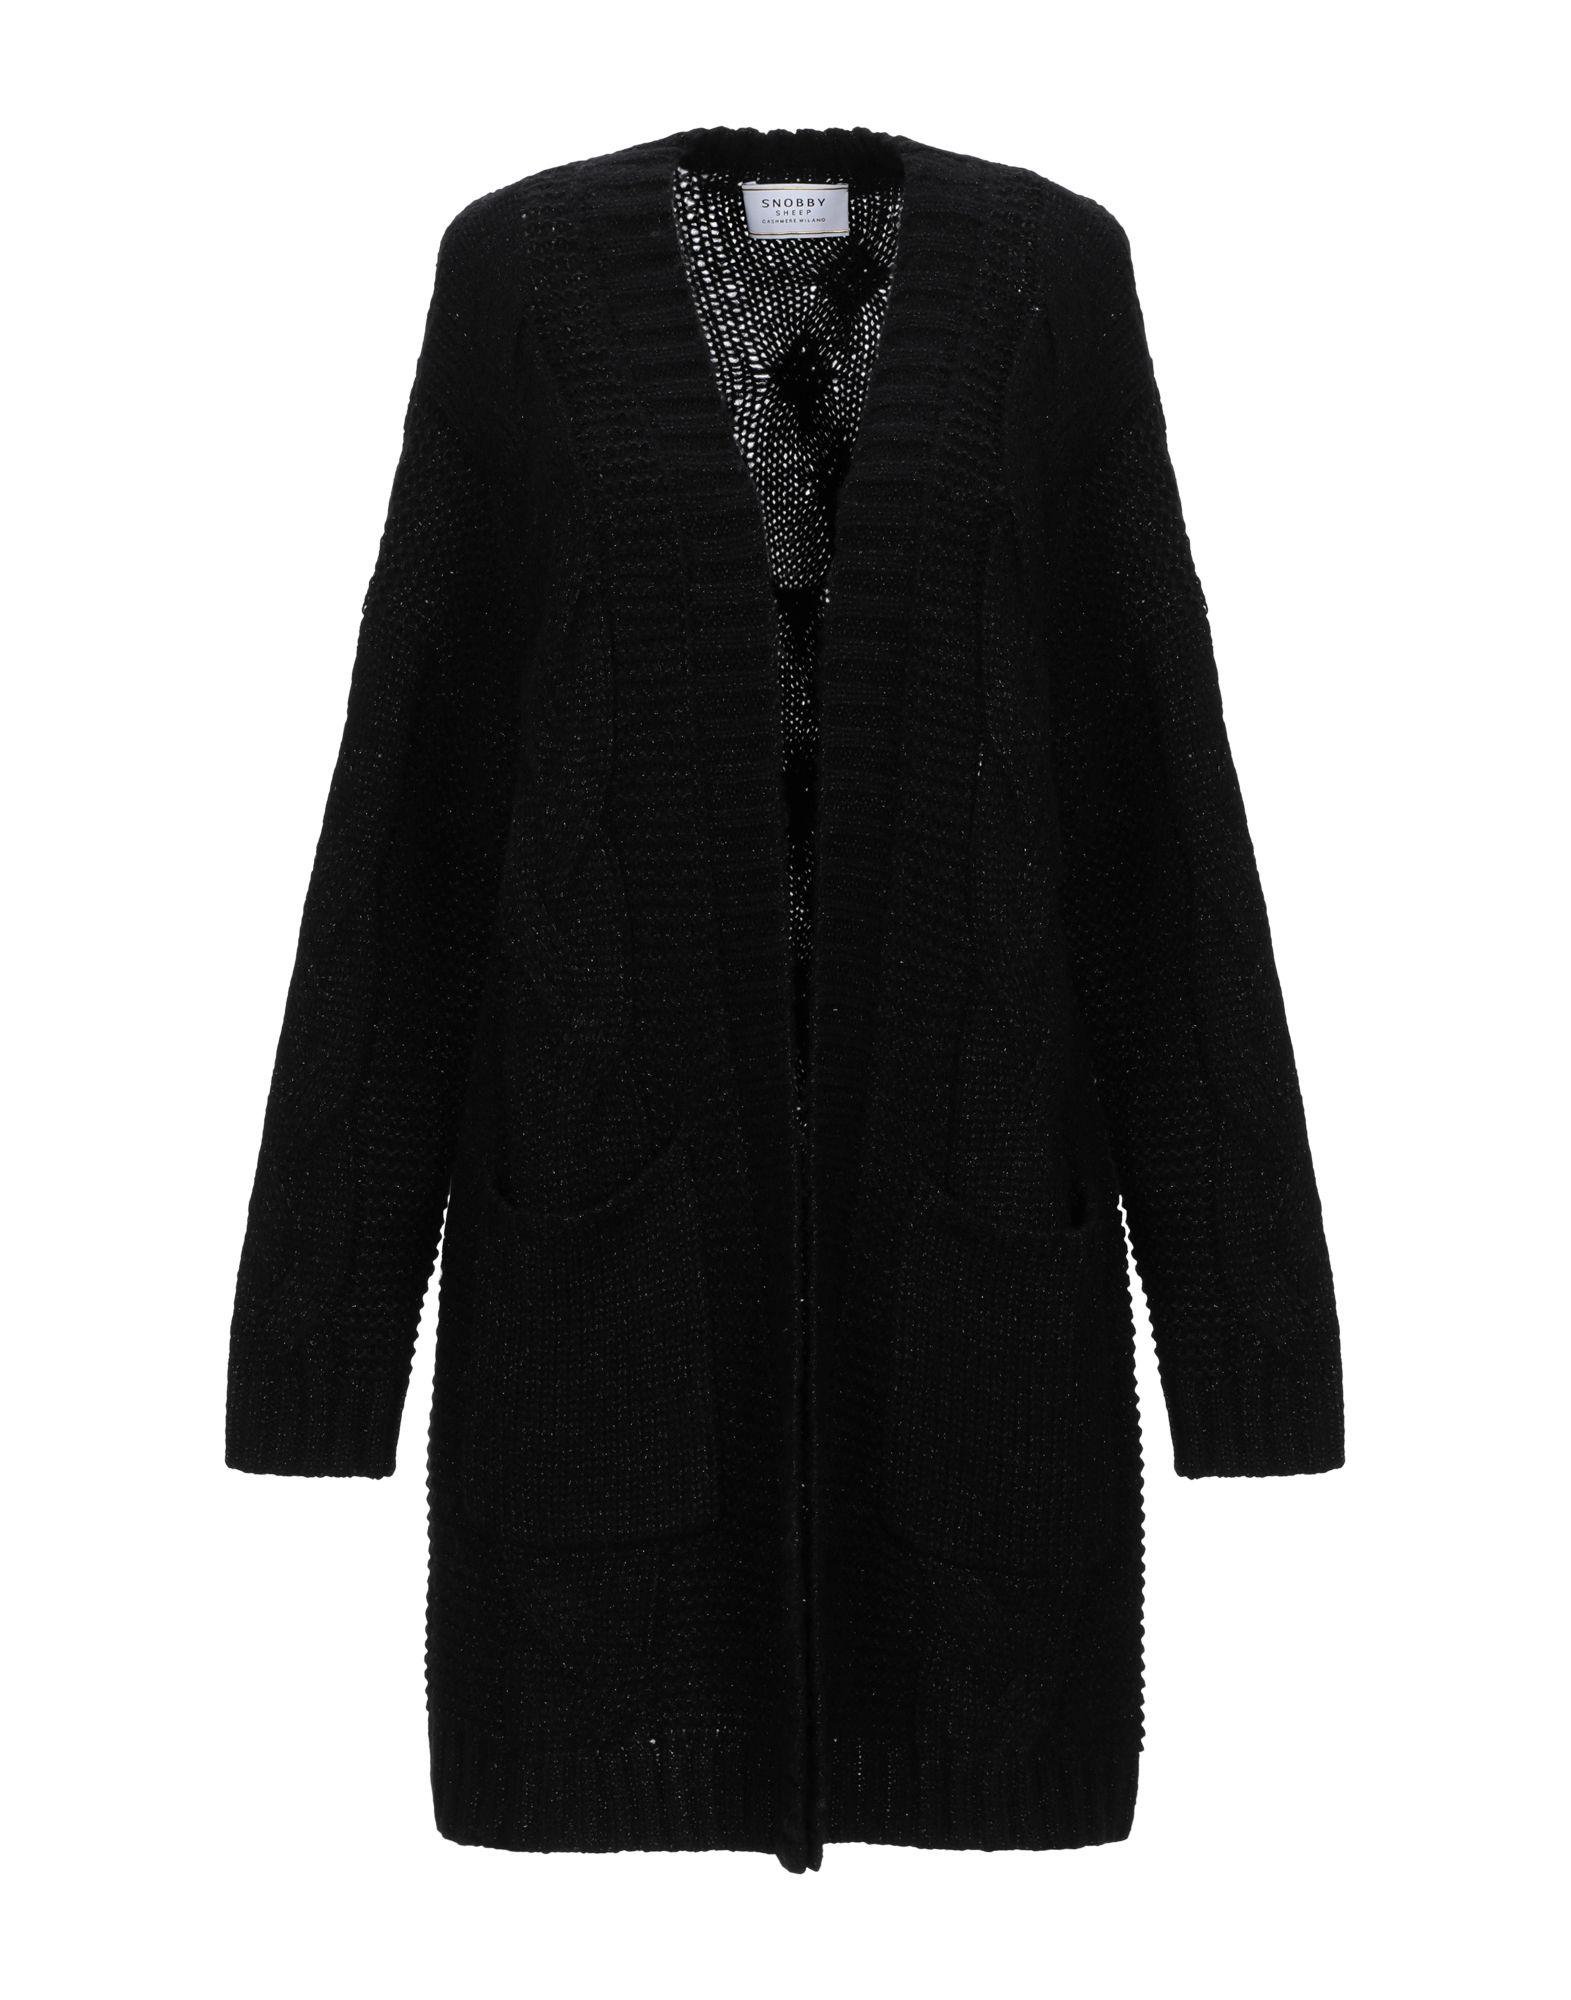 Snobby Sheep Synthetic Cardigan in Black - Lyst